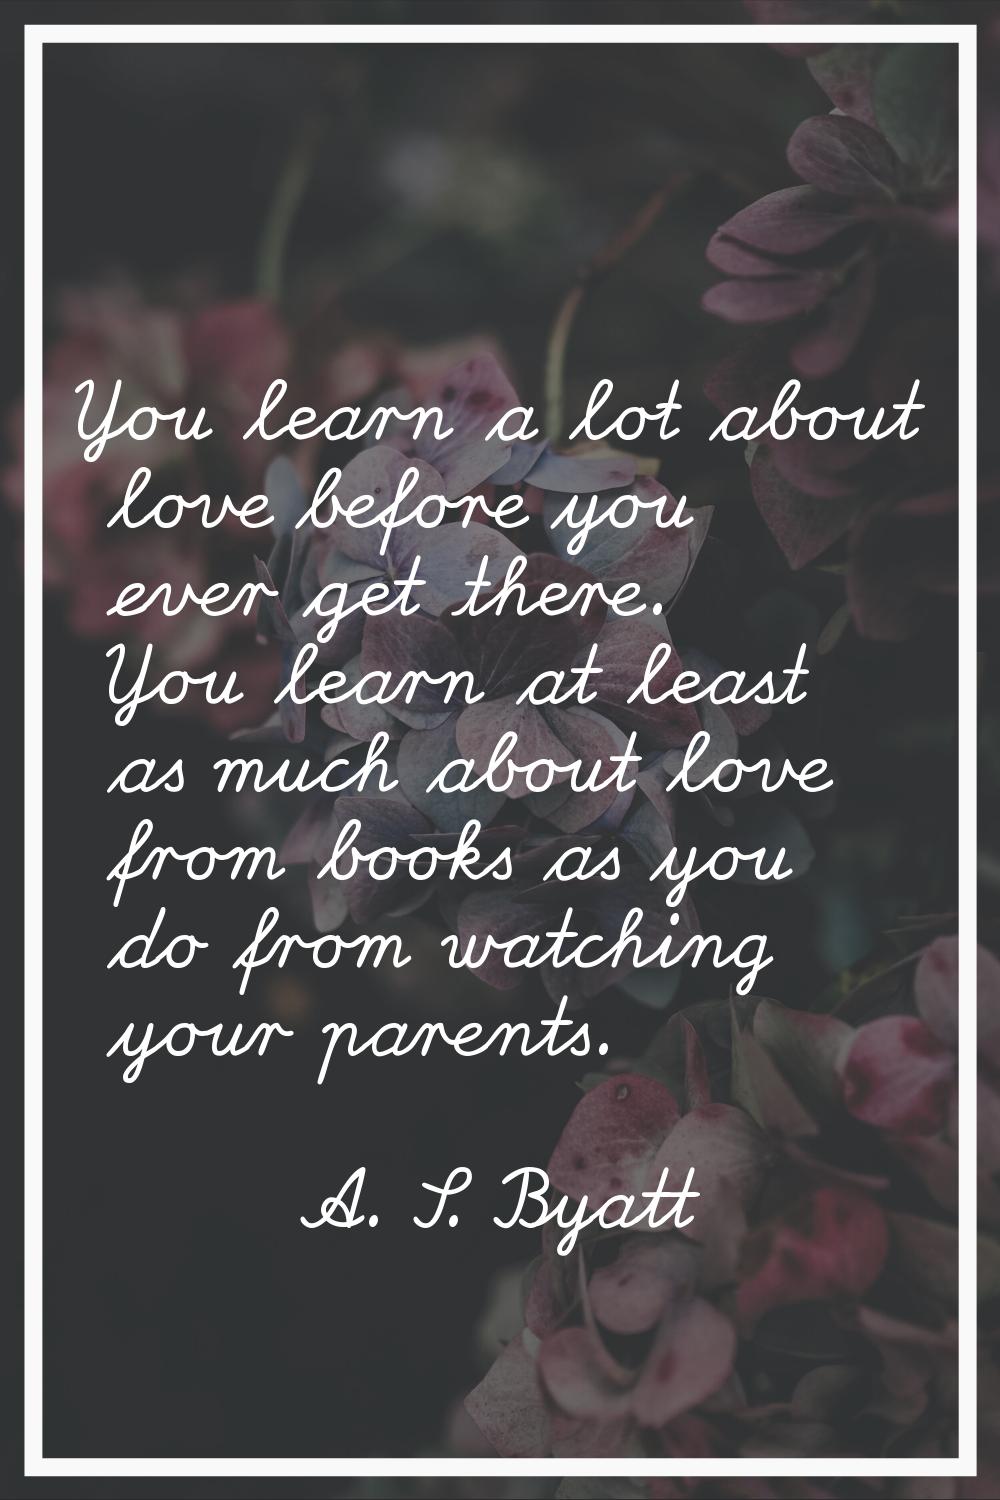 You learn a lot about love before you ever get there. You learn at least as much about love from bo